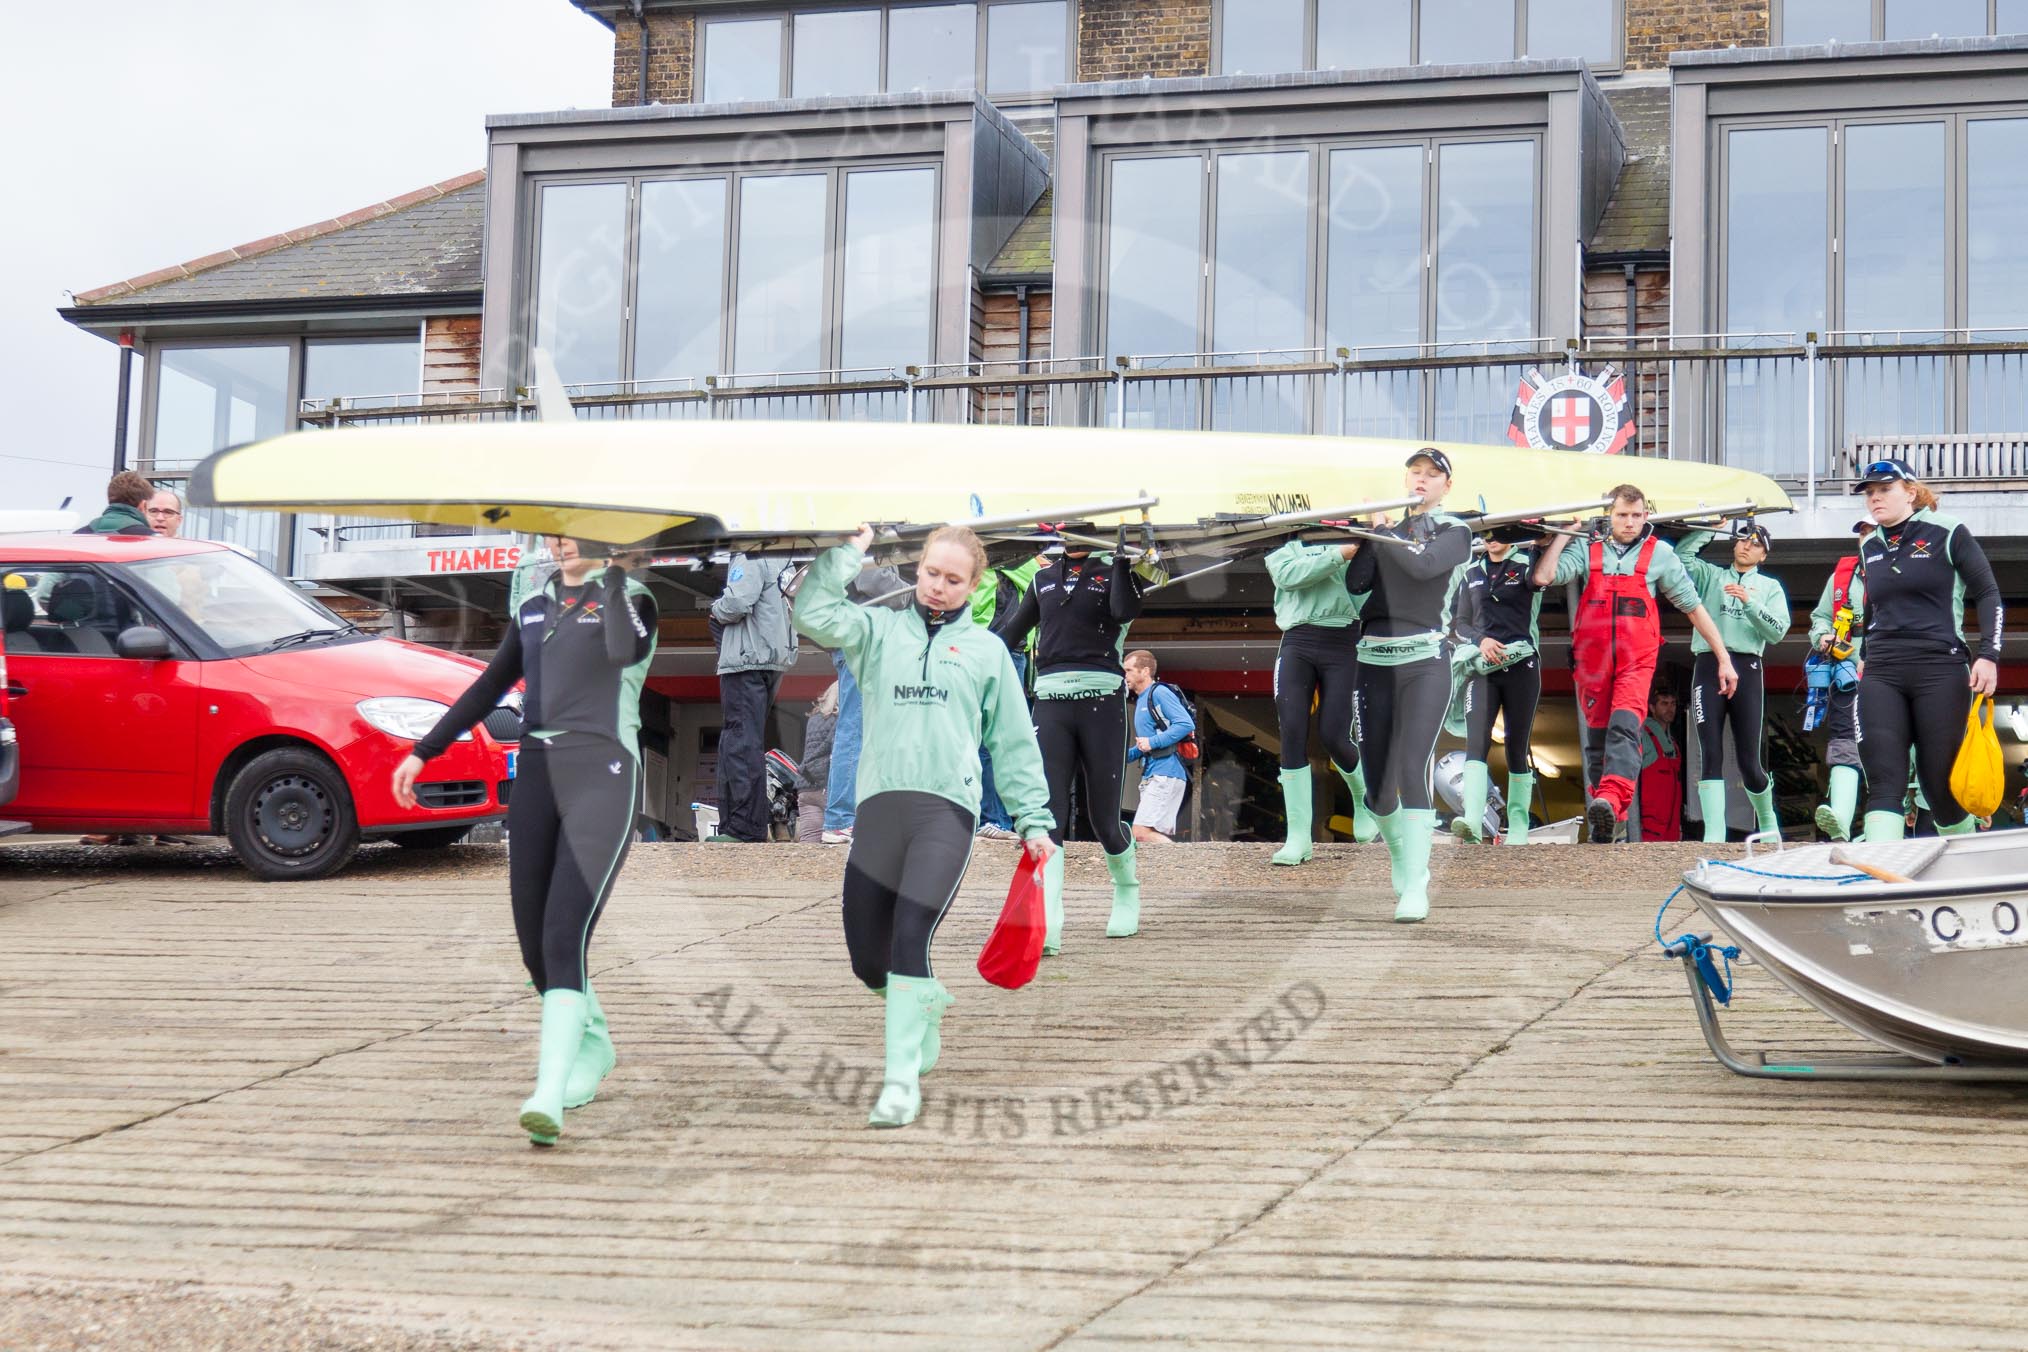 The Boat Race season 2016 - Women's Boat Race Trial Eights (CUWBC, Cambridge): CUWBC boat "Twickenham" is carried from Thames Rowing Club down to the river.
River Thames between Putney Bridge and Mortlake,
London SW15,

United Kingdom,
on 10 December 2015 at 10:15, image #5